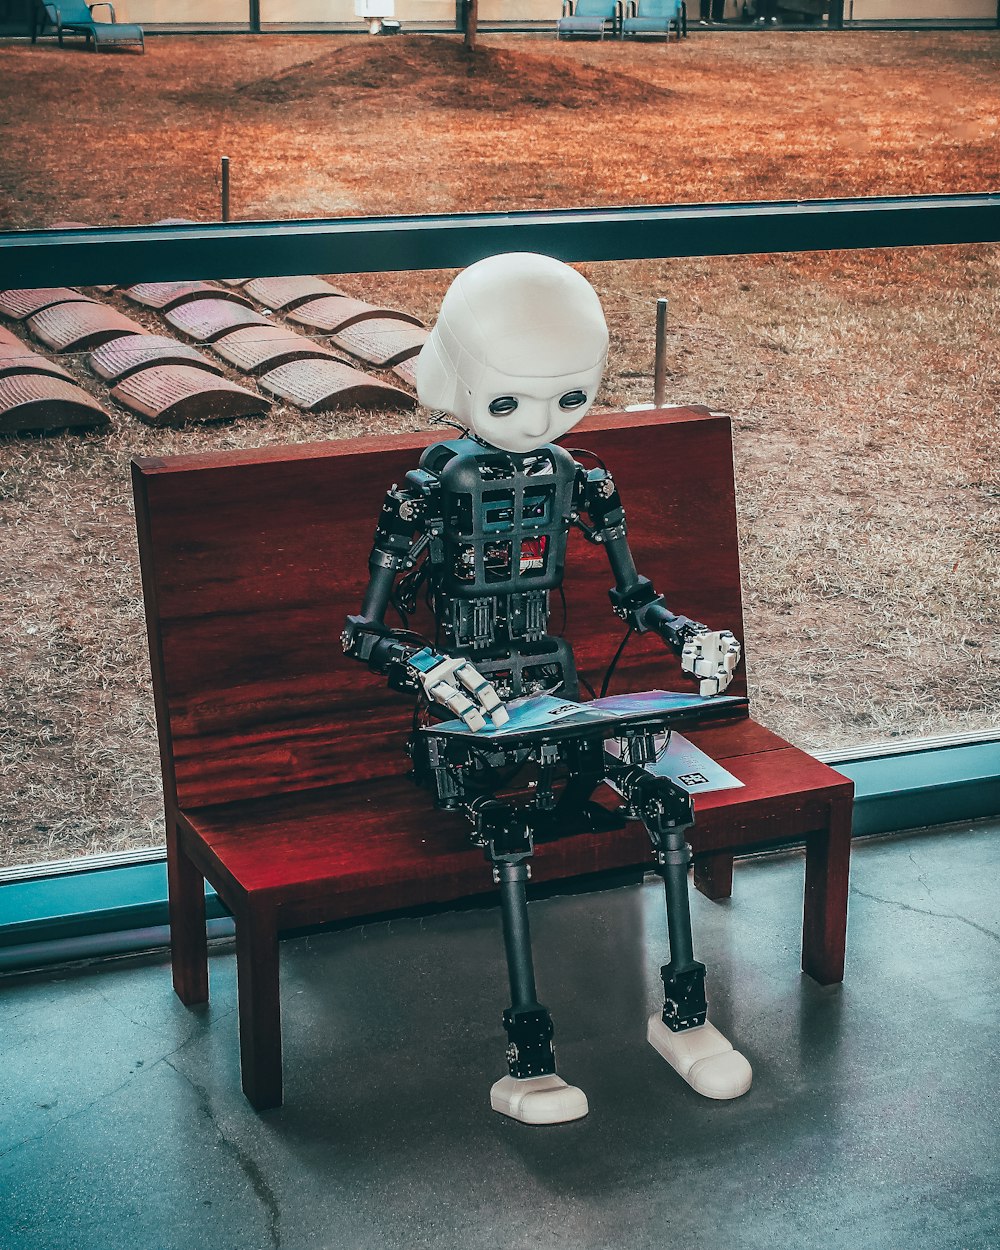 Robot sitting on a bench, using AI video editing tools on a tablet